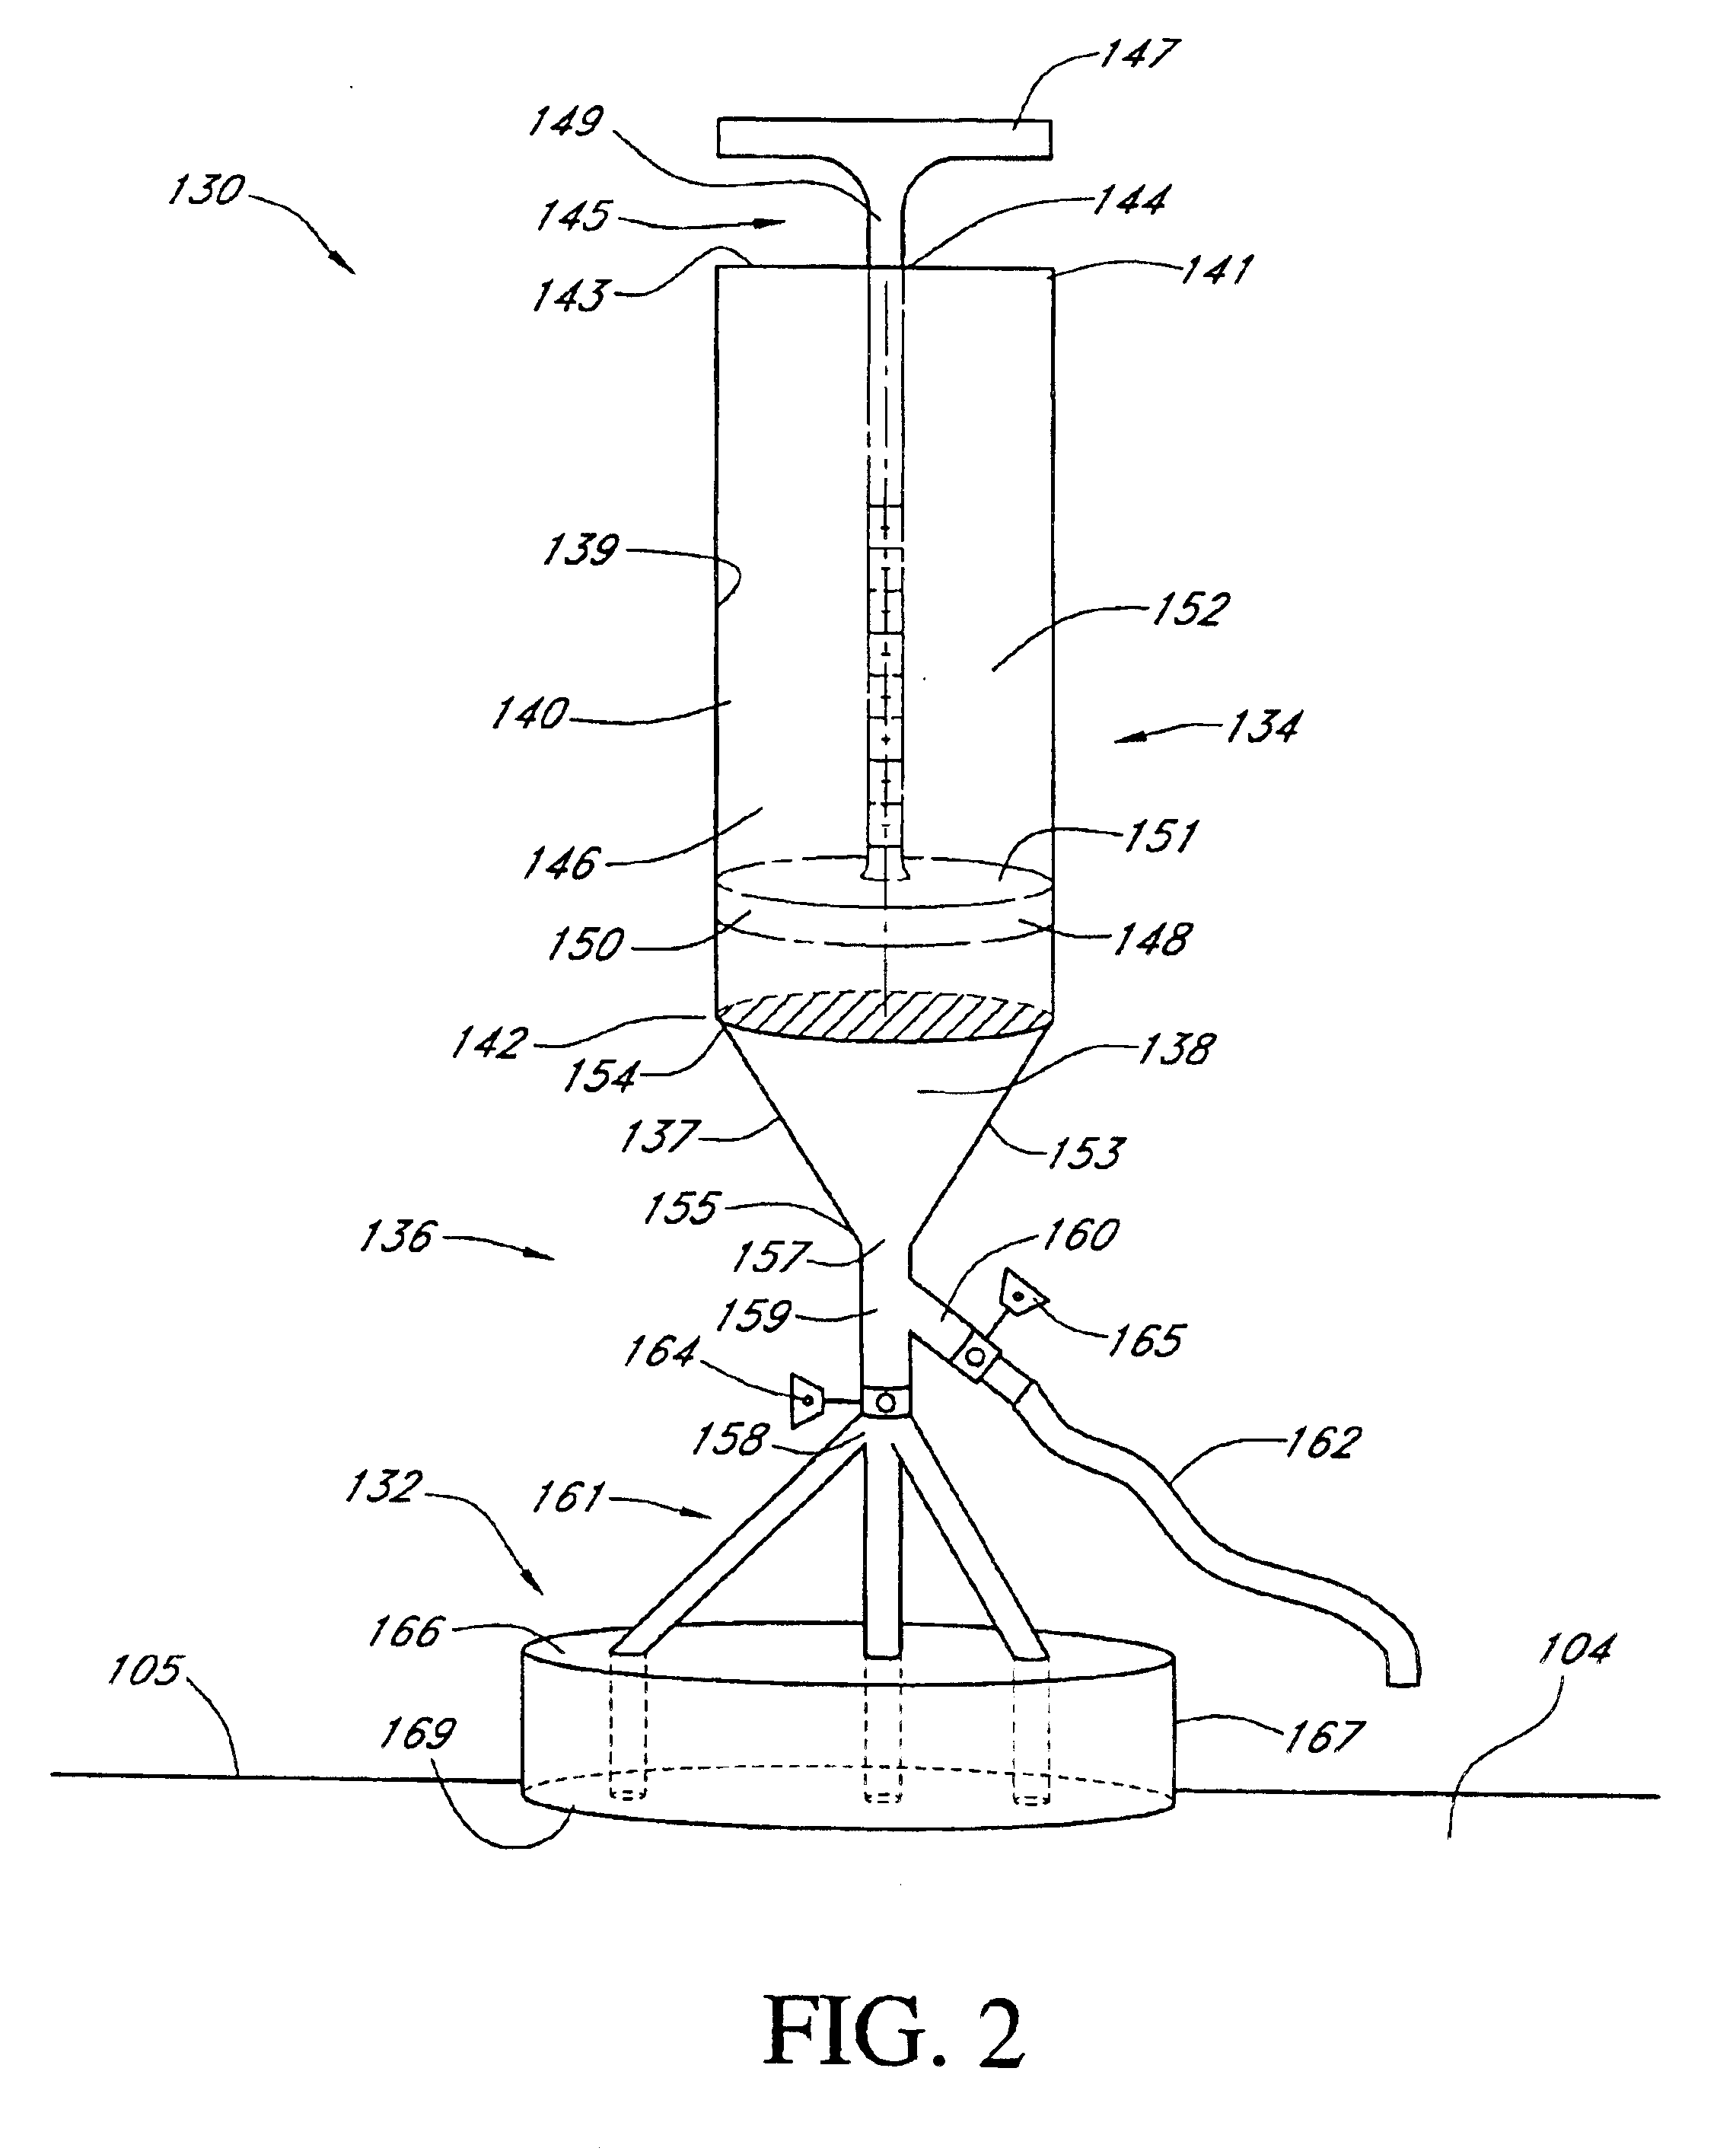 Device and method for collecting and measuring chemical samples on pad surface in CMP